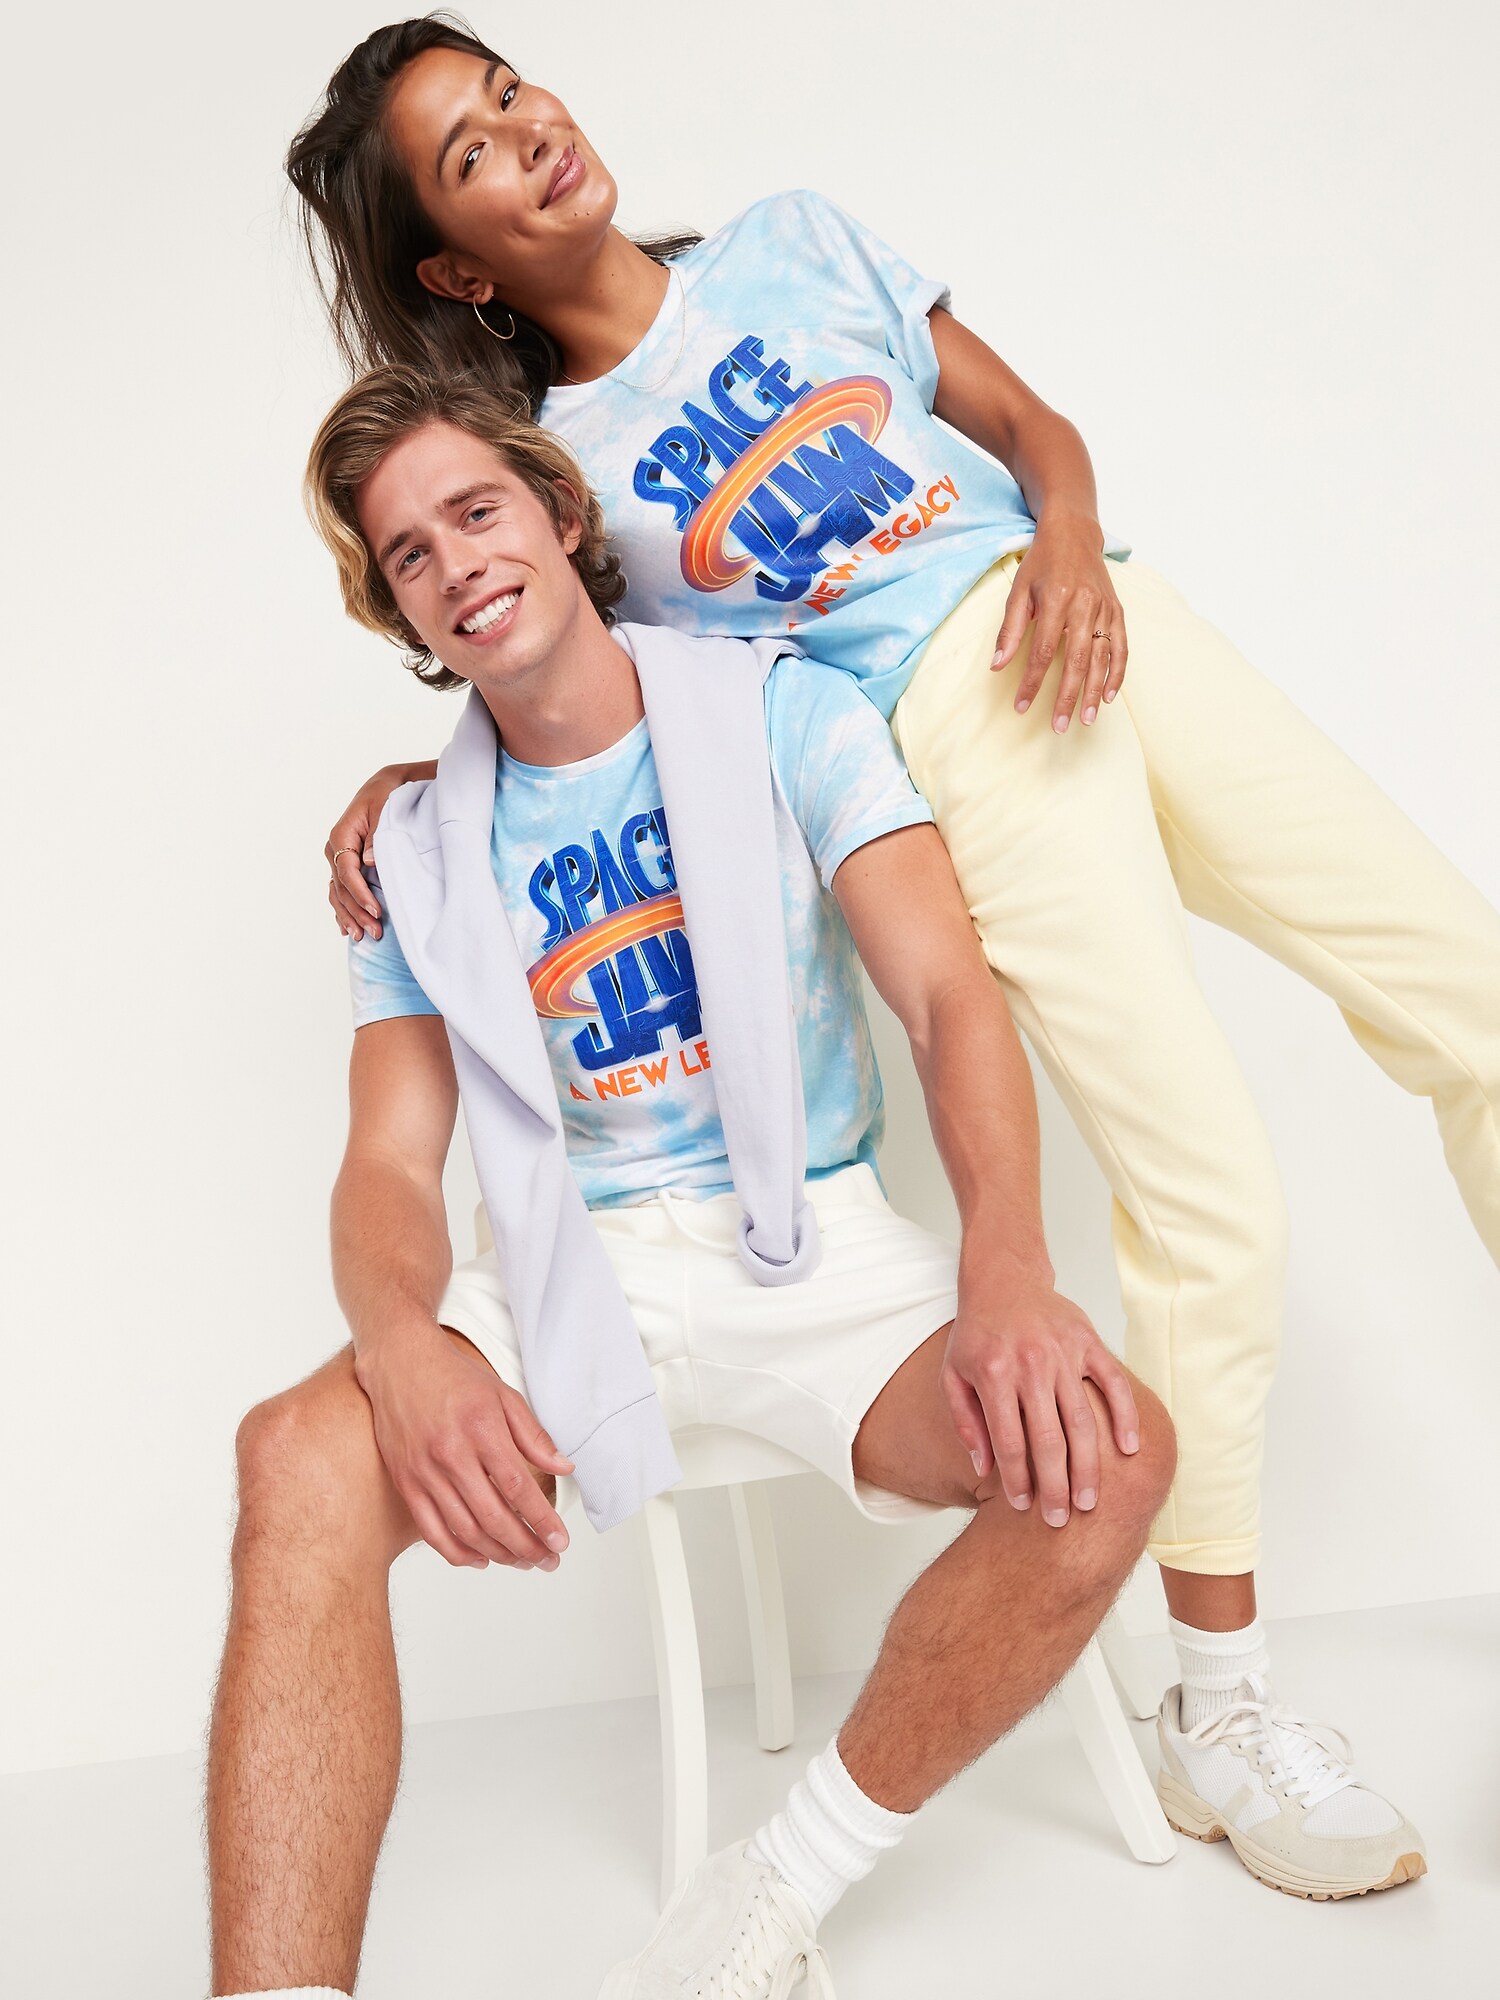 Space Jam A New Legacy™ Tie-Dye Gender-Neutral Graphic T-Shirt for Adults